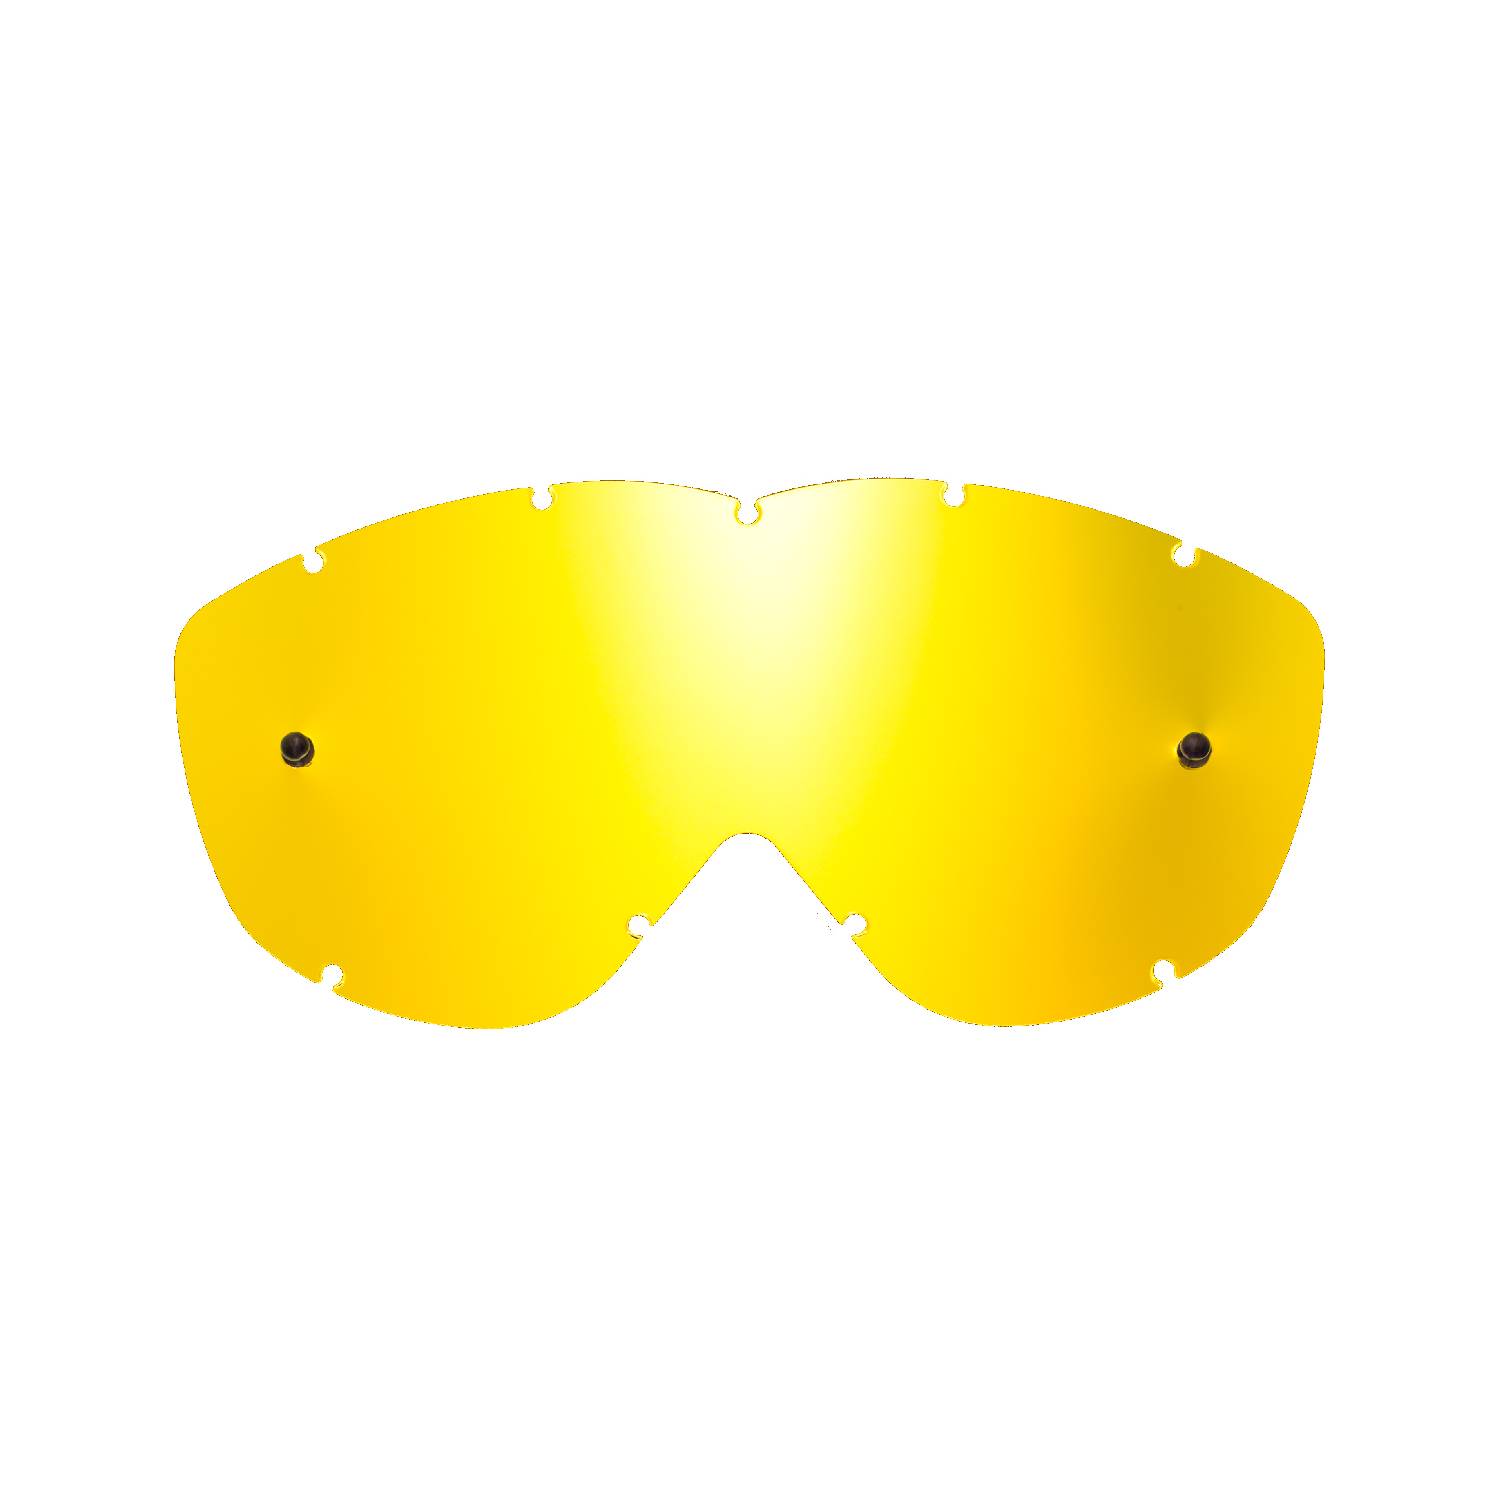 gold-toned mirrored replacement lenses for goggles compatible for Spy Alloy / Targa goggle